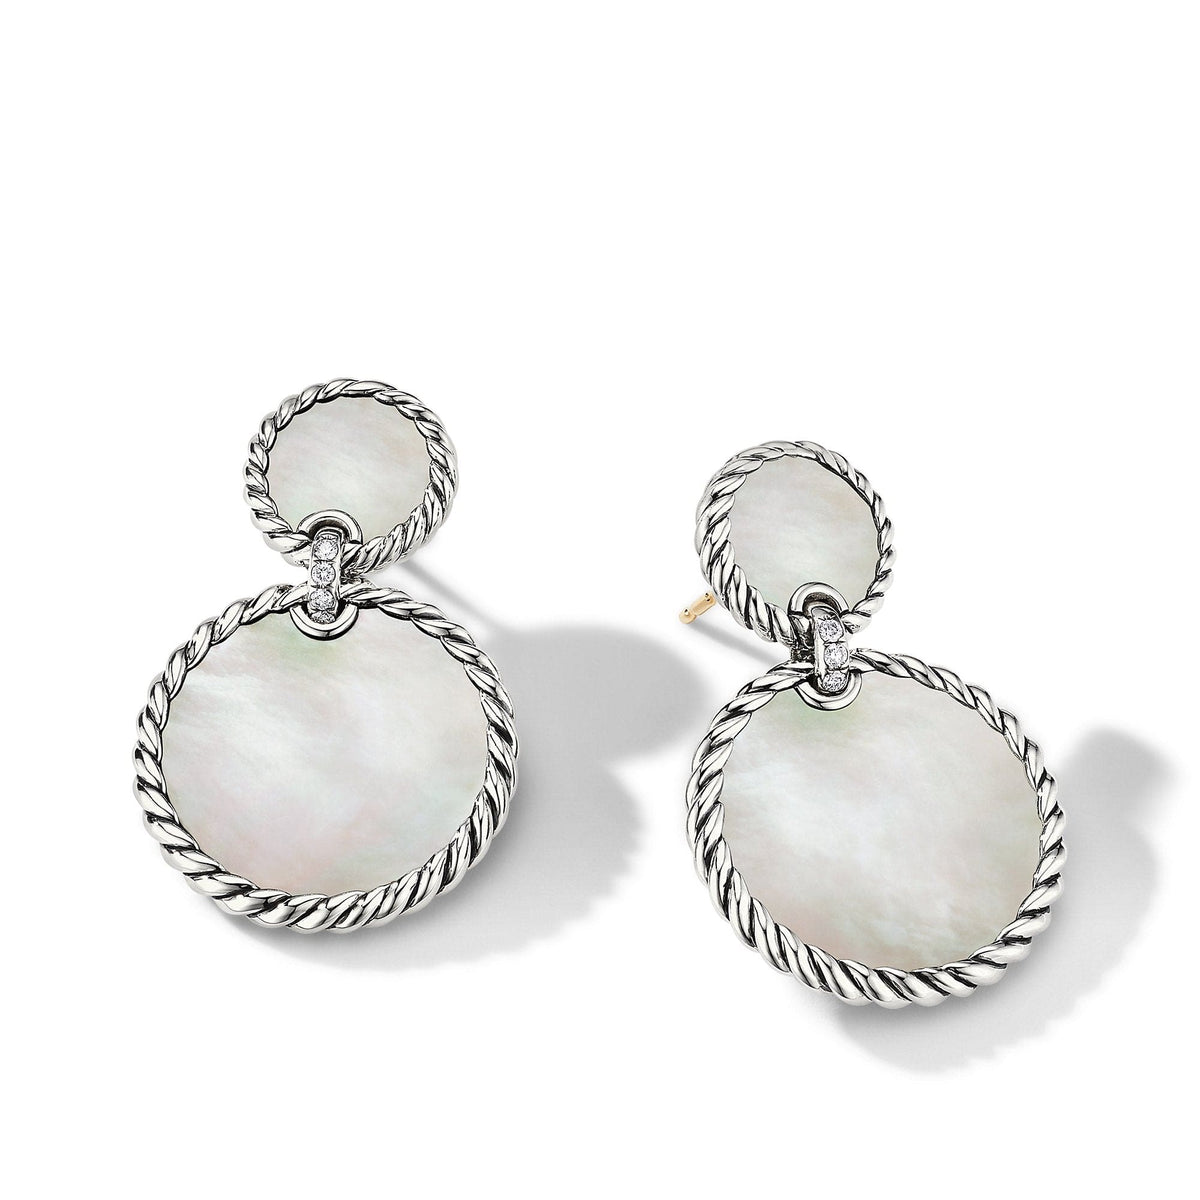 DY Elements Double Drop Earrings with Mother of Pearl and Pavé Diamonds